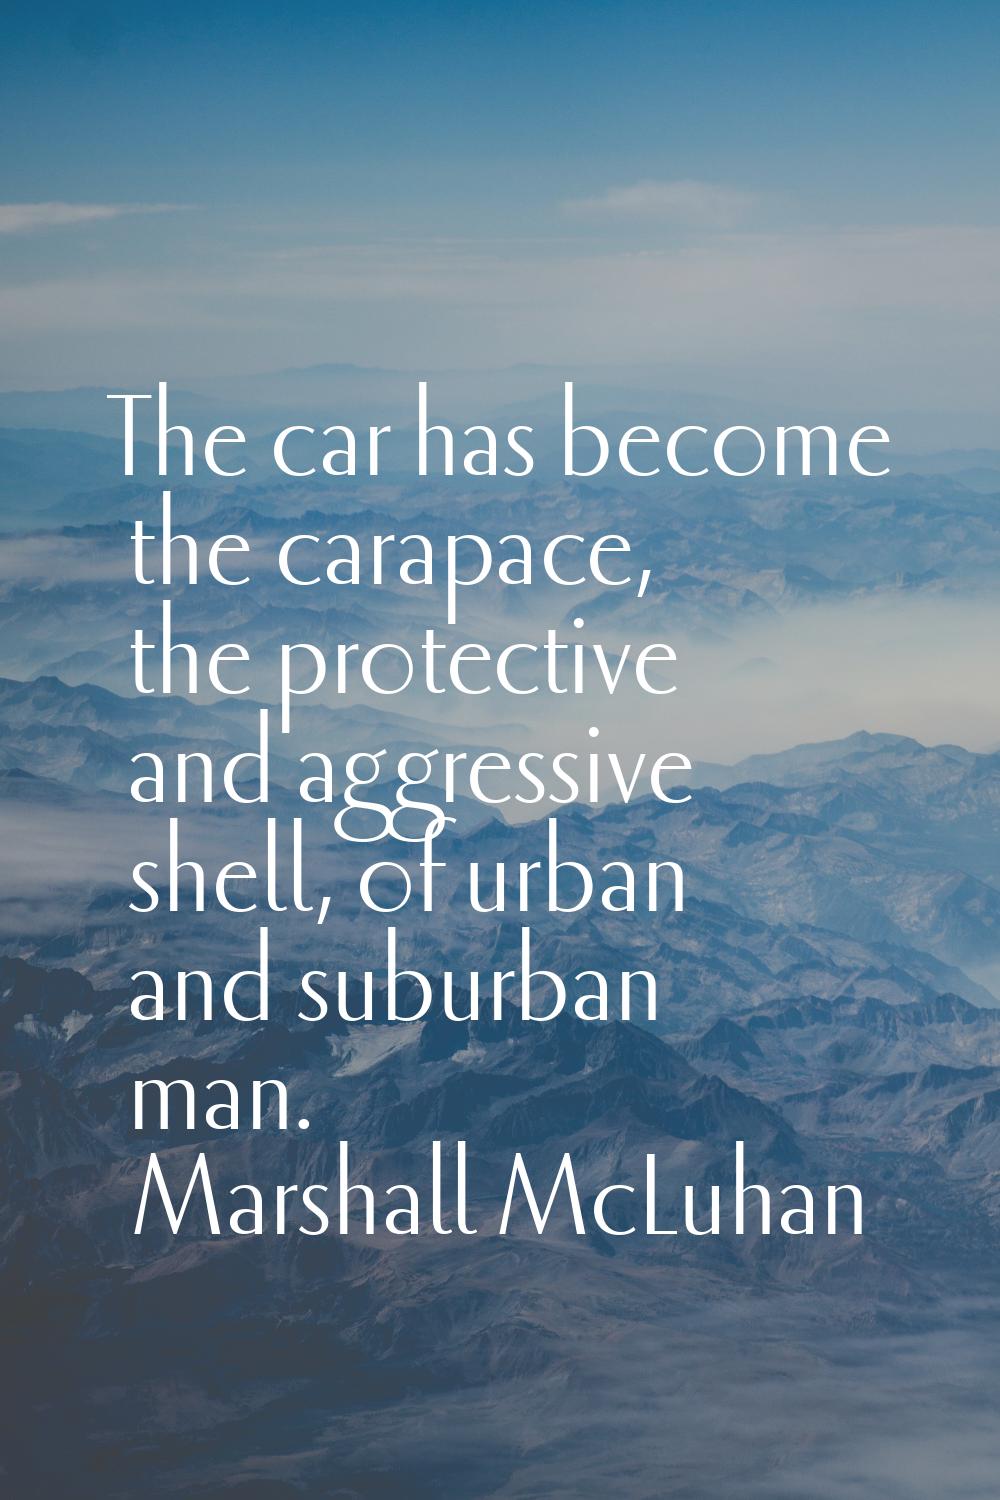 The car has become the carapace, the protective and aggressive shell, of urban and suburban man.